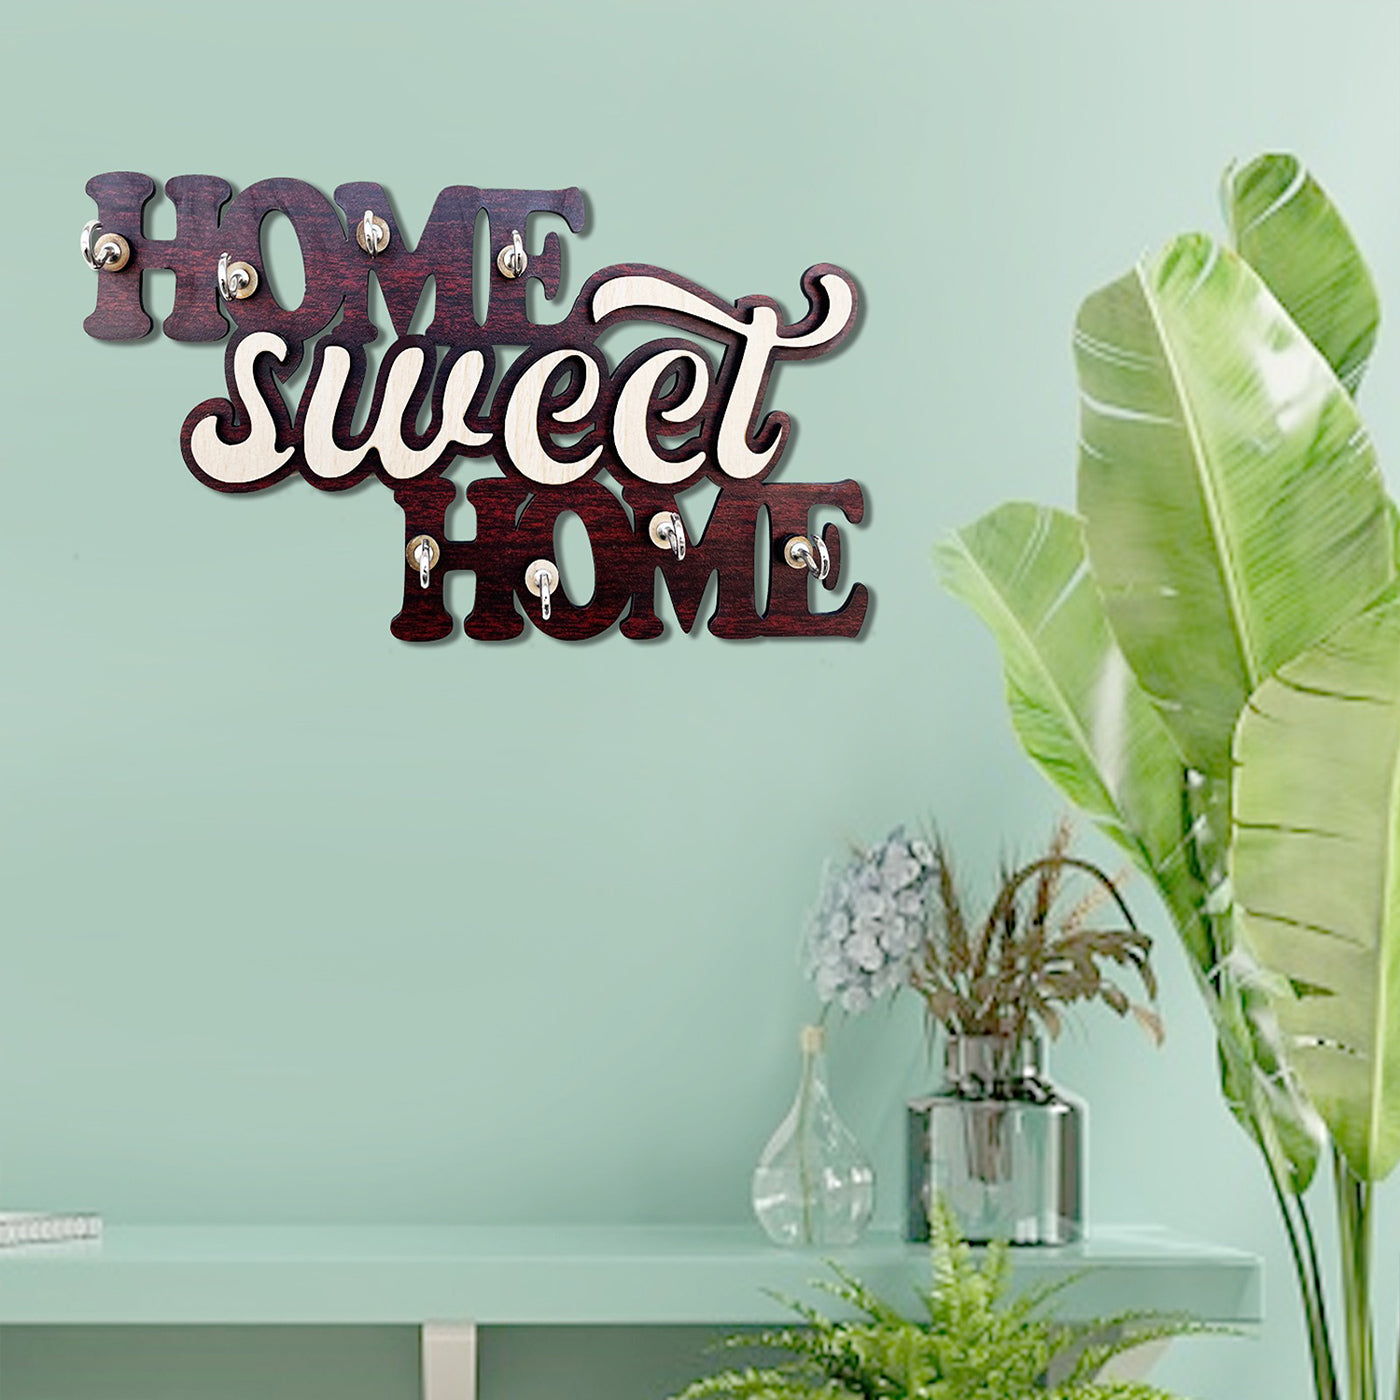 Home sweet home wooden key holder | 6 hooks | wall decor | home decor | gifting | bday gift